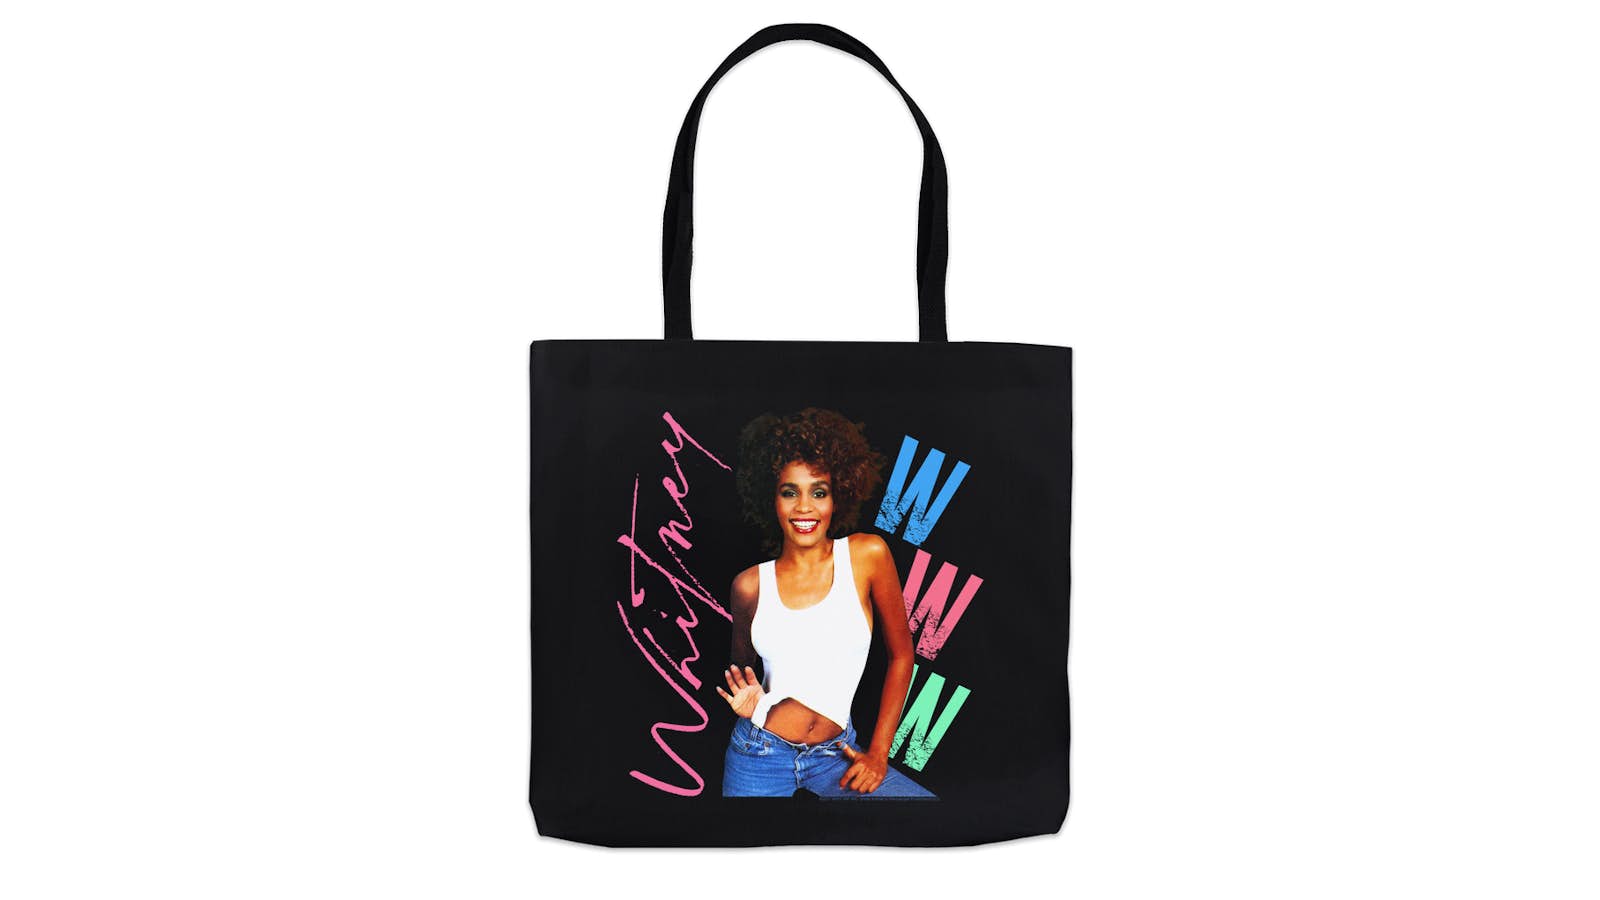 Greatest Love Crest Tote Bag  Shop the Whitney Houston Boutique